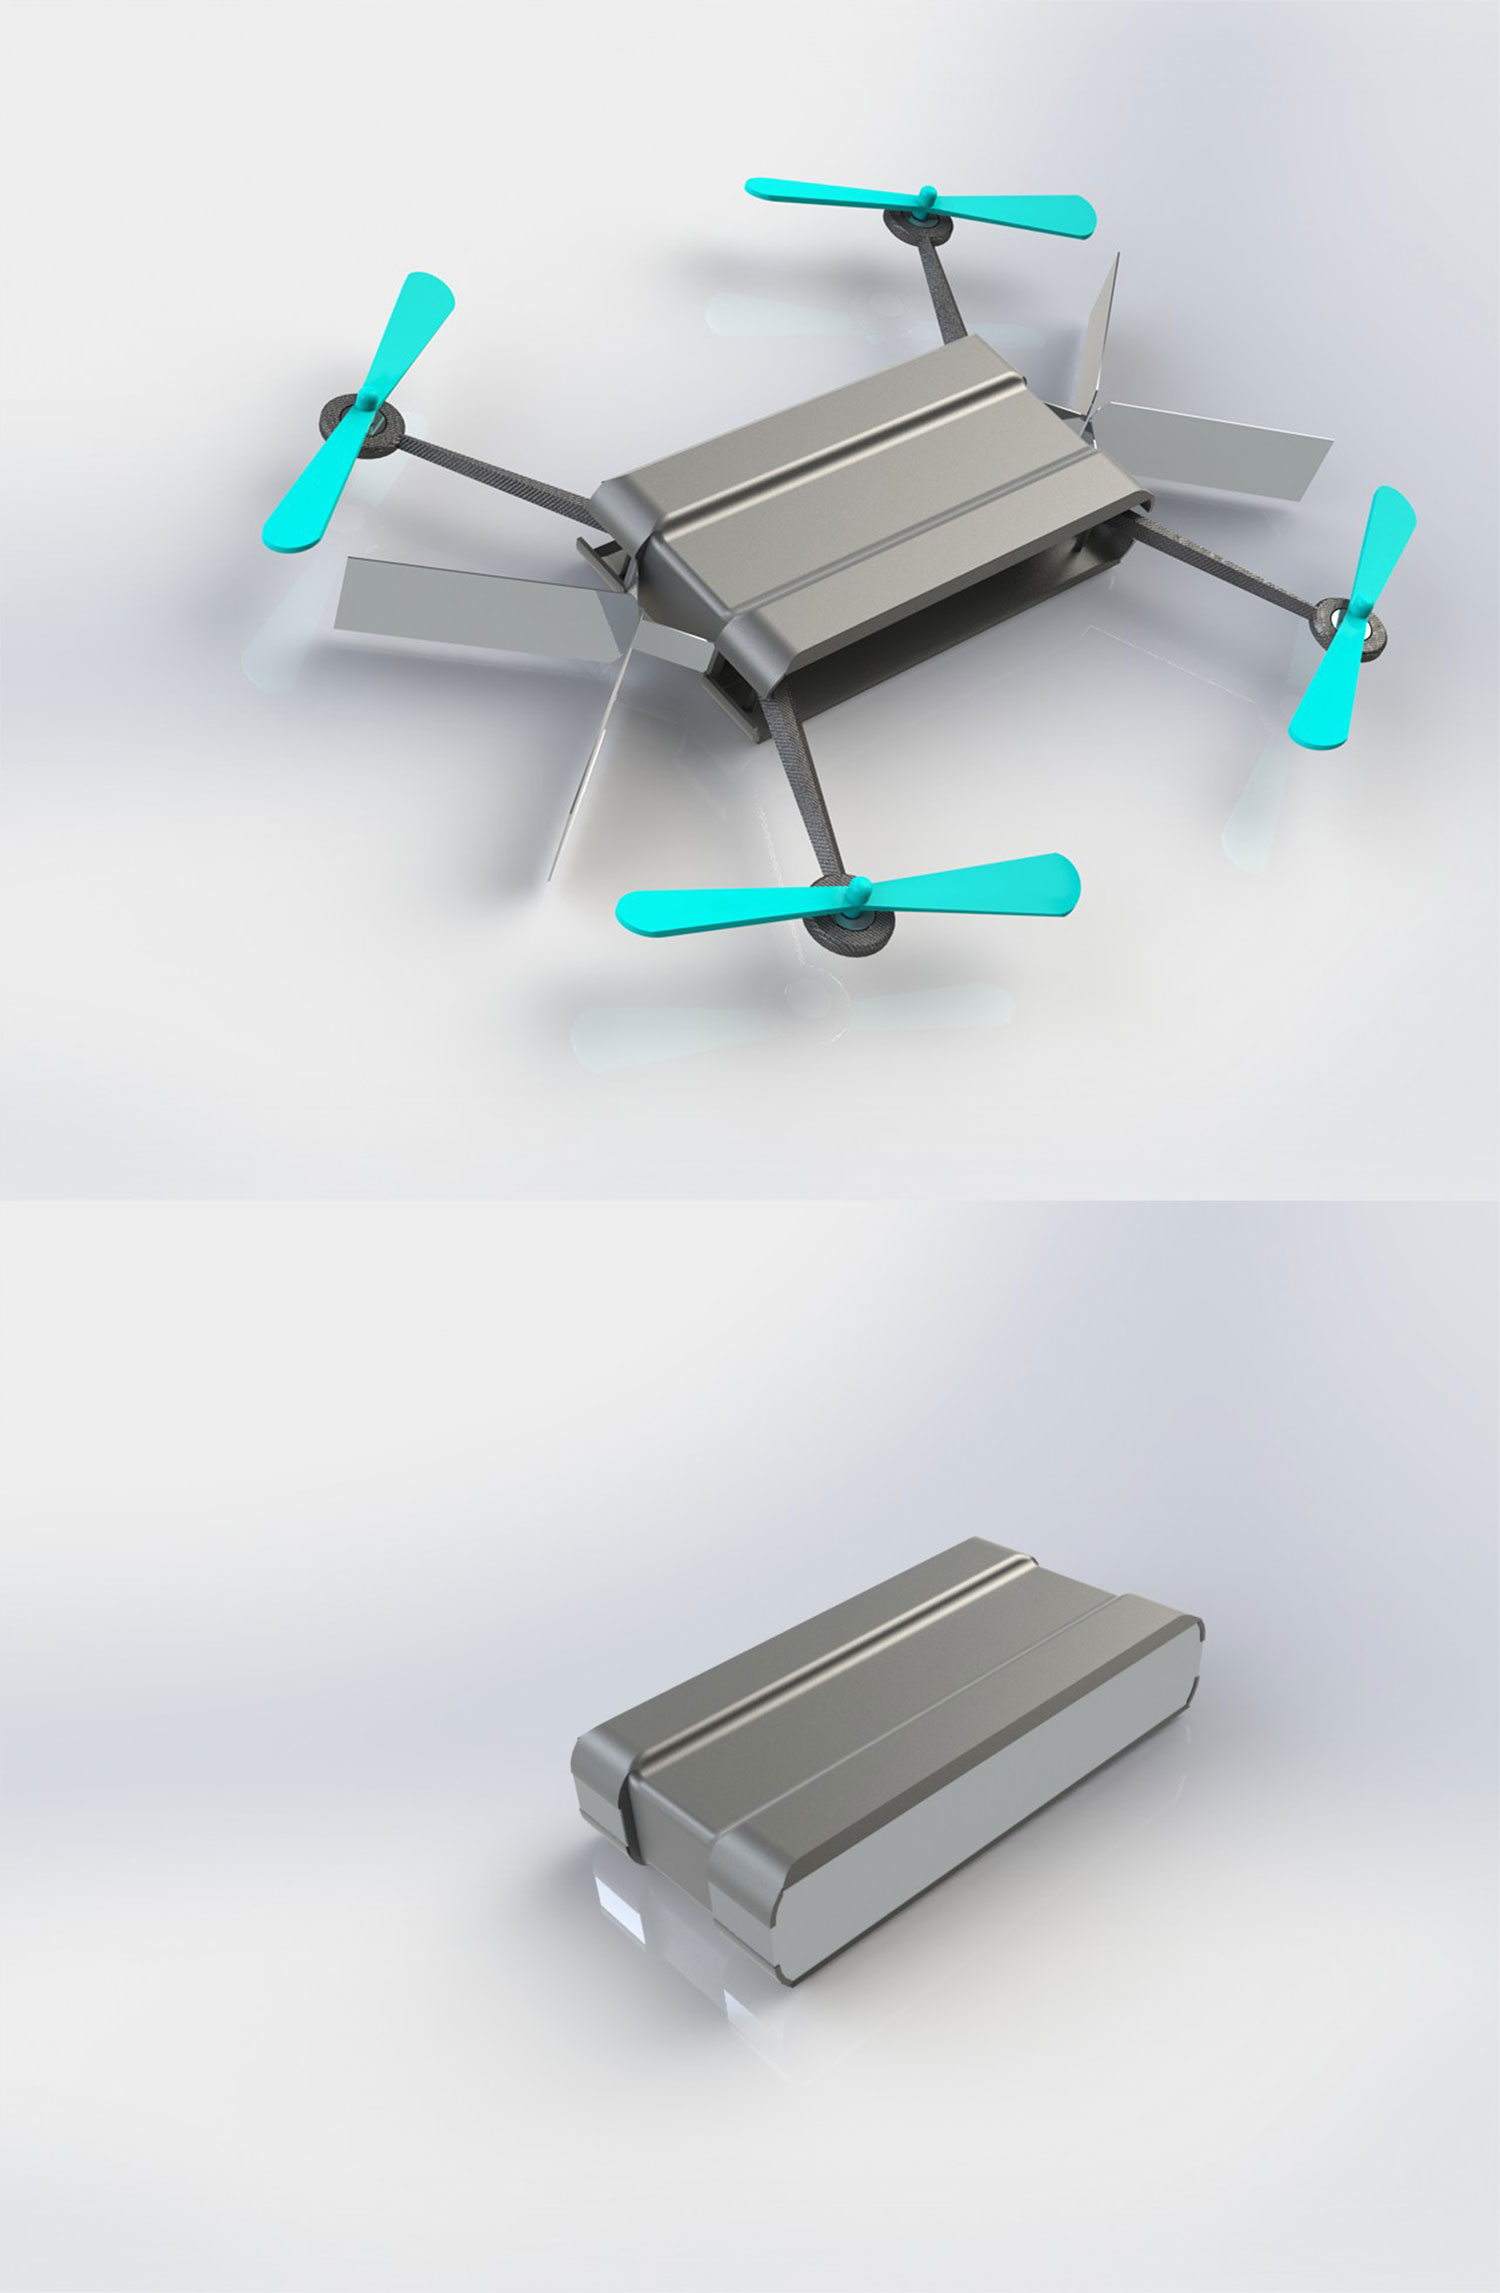 3D design of grey pocket size drone with turquoise wings. .